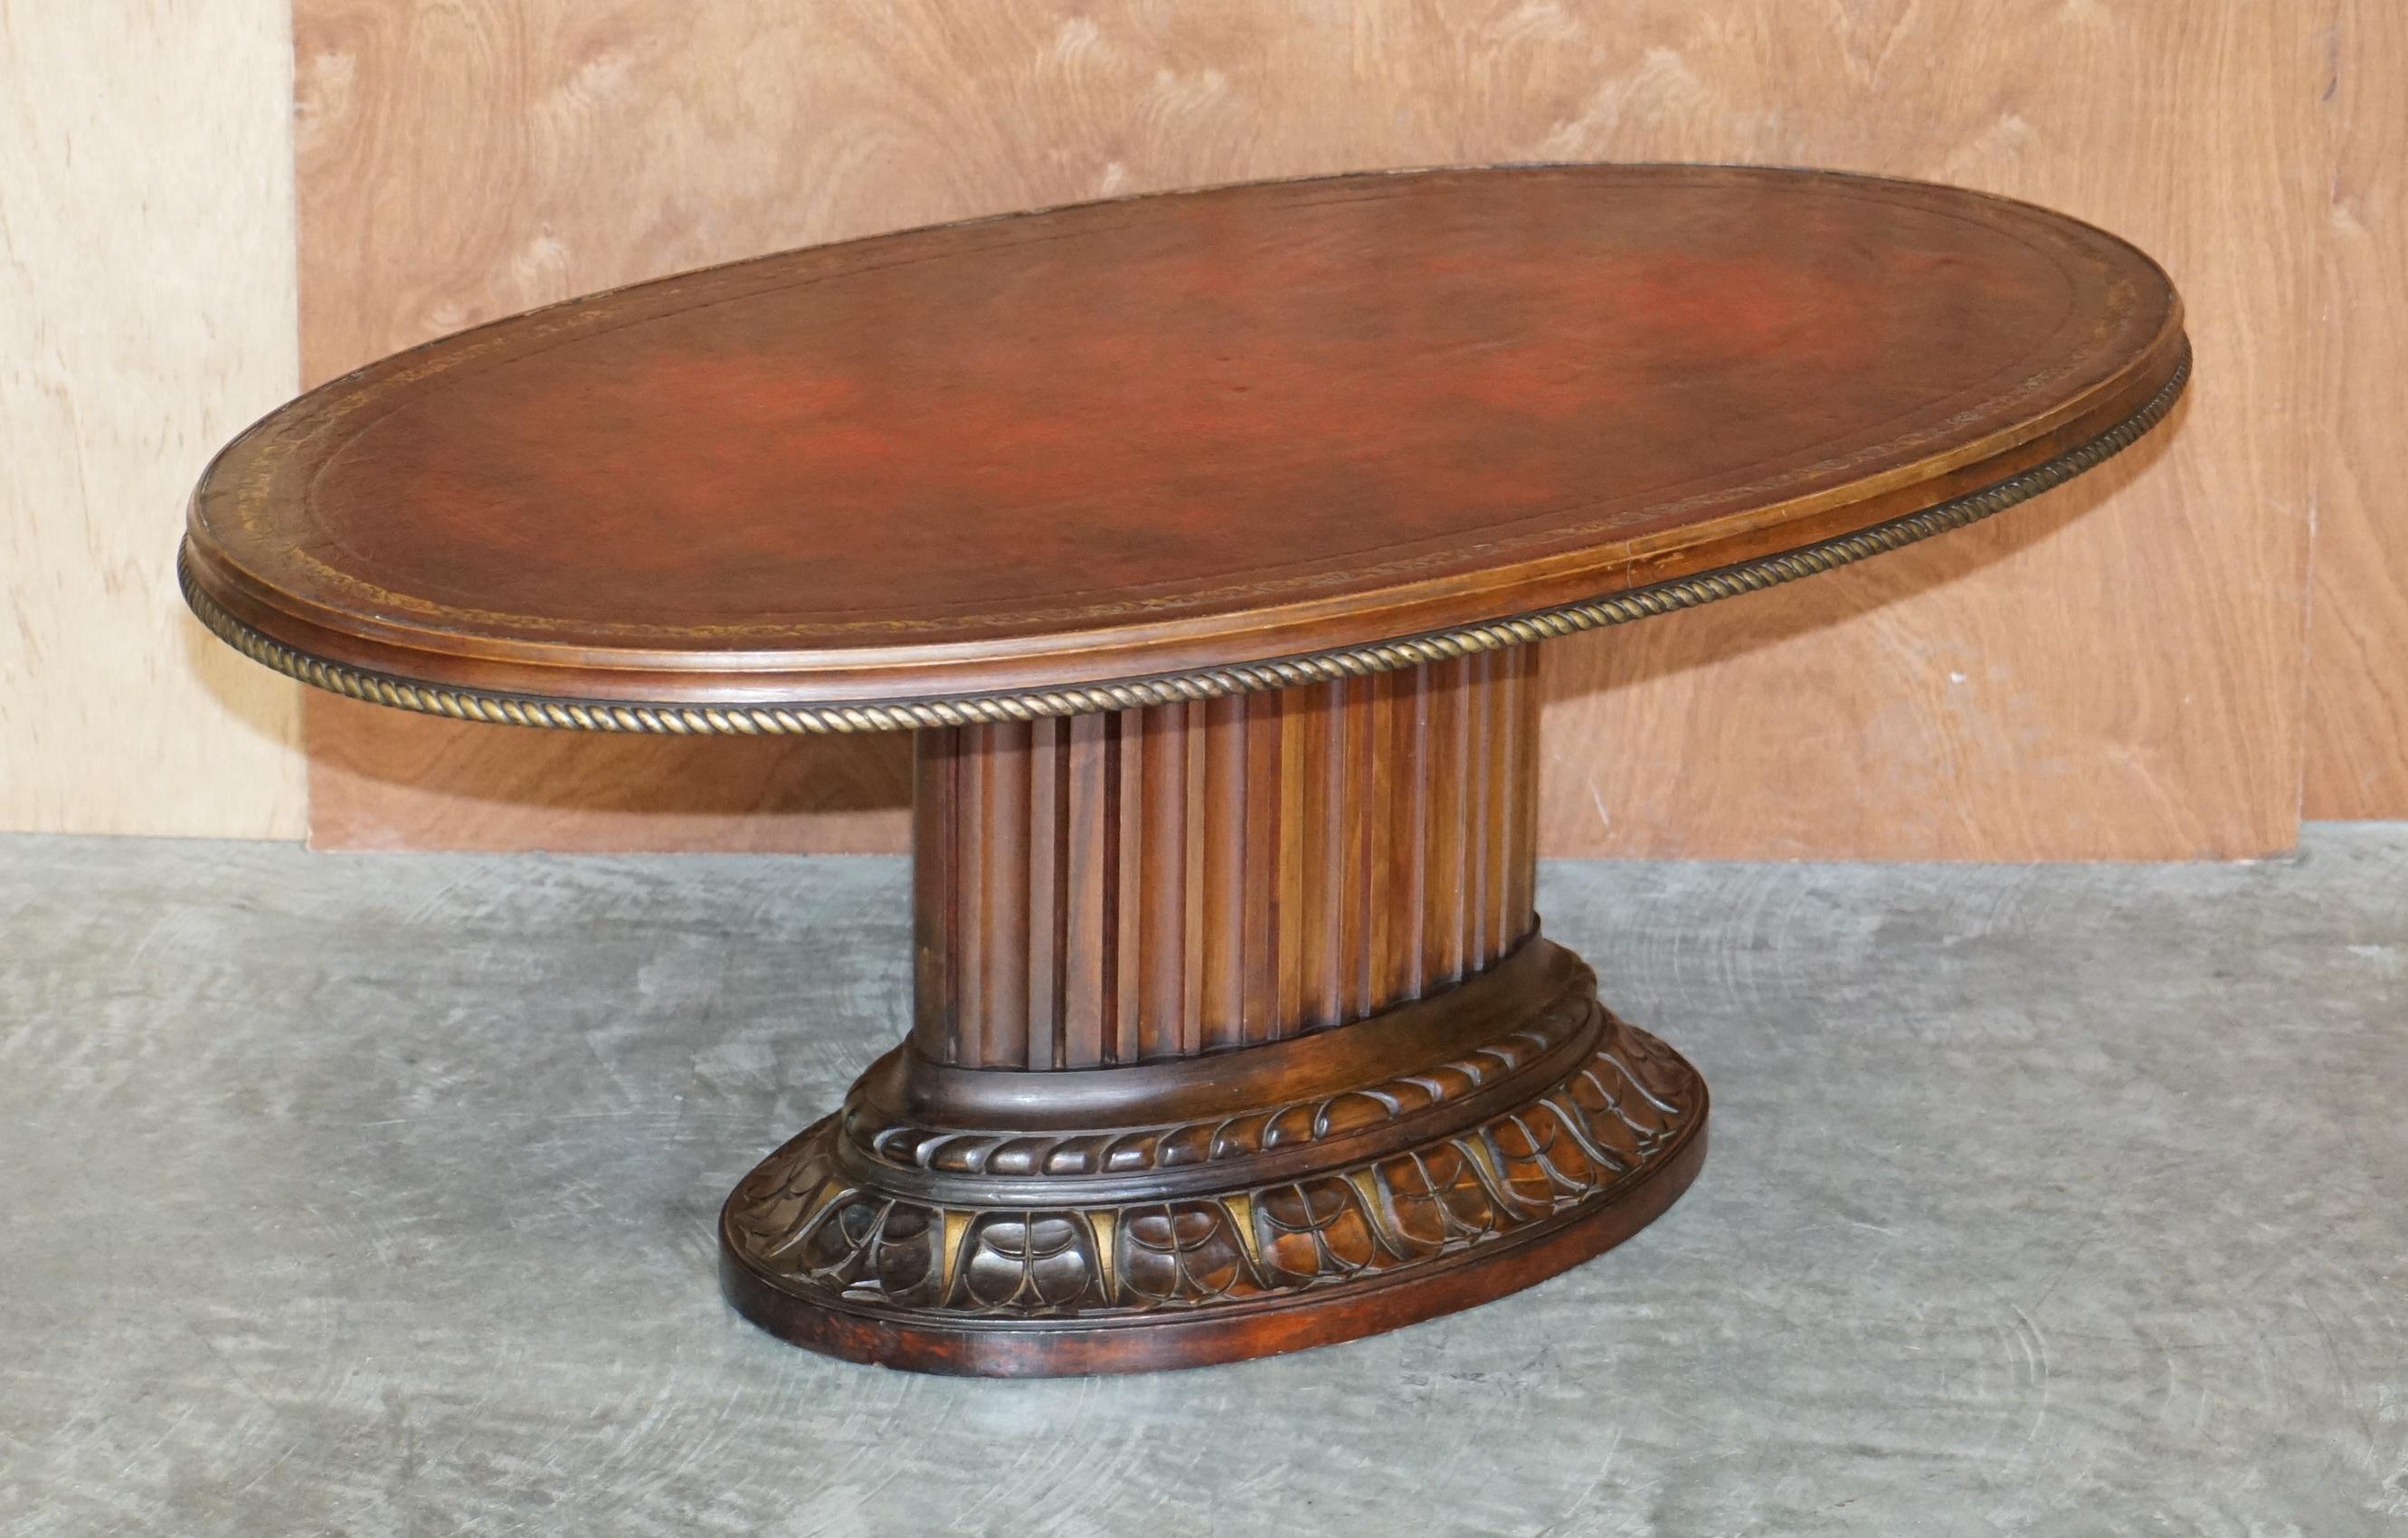 We are delighted to offer for sale this lovely vintage hand made Oxblood leather oval coffee or cocktail table with Roman Corinthian pillar type base

A good looking and decorative table, I’ve never seen this model before, its very decorative. The